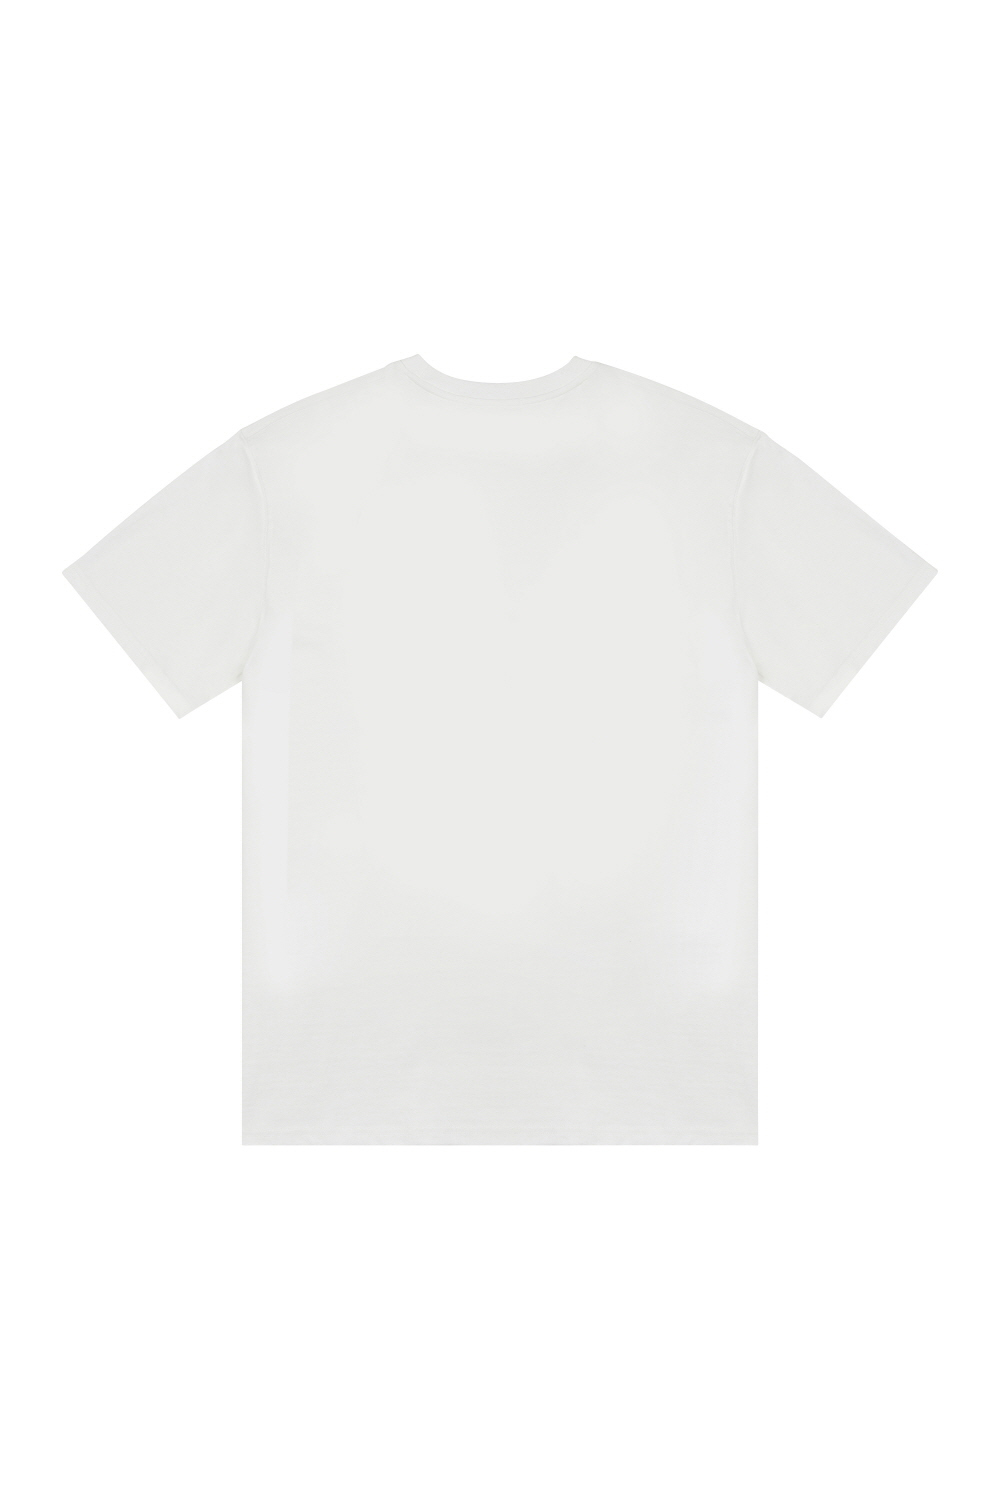 short sleeved tee white color image-S10L2